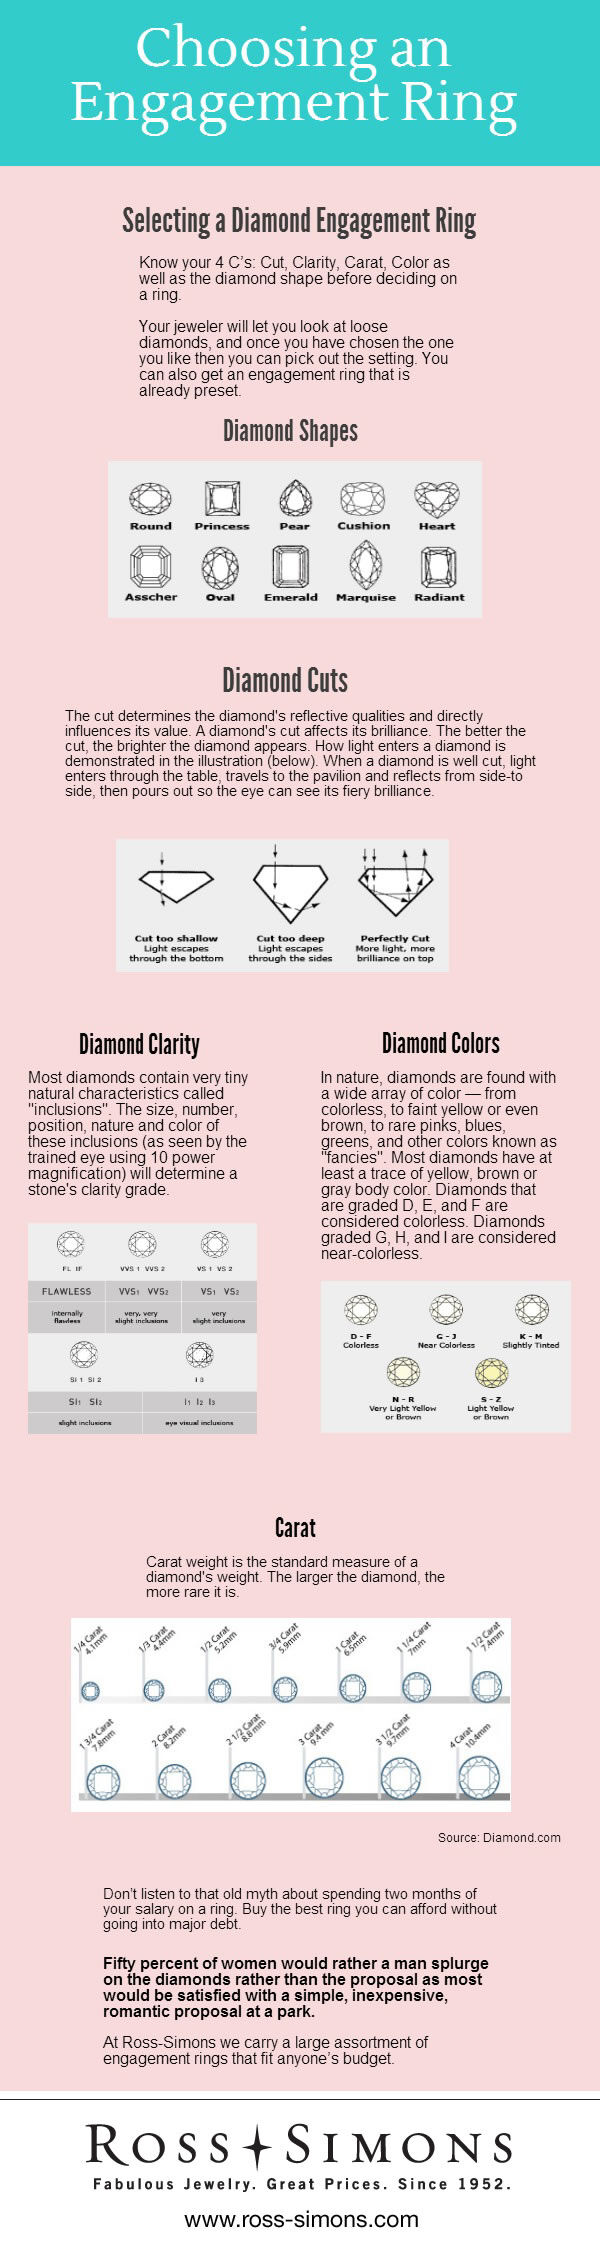 Choosing a Diamond Engagement Ring Infographic. Text for this infographic can be found below under 'Infographic Full-Text' headline.